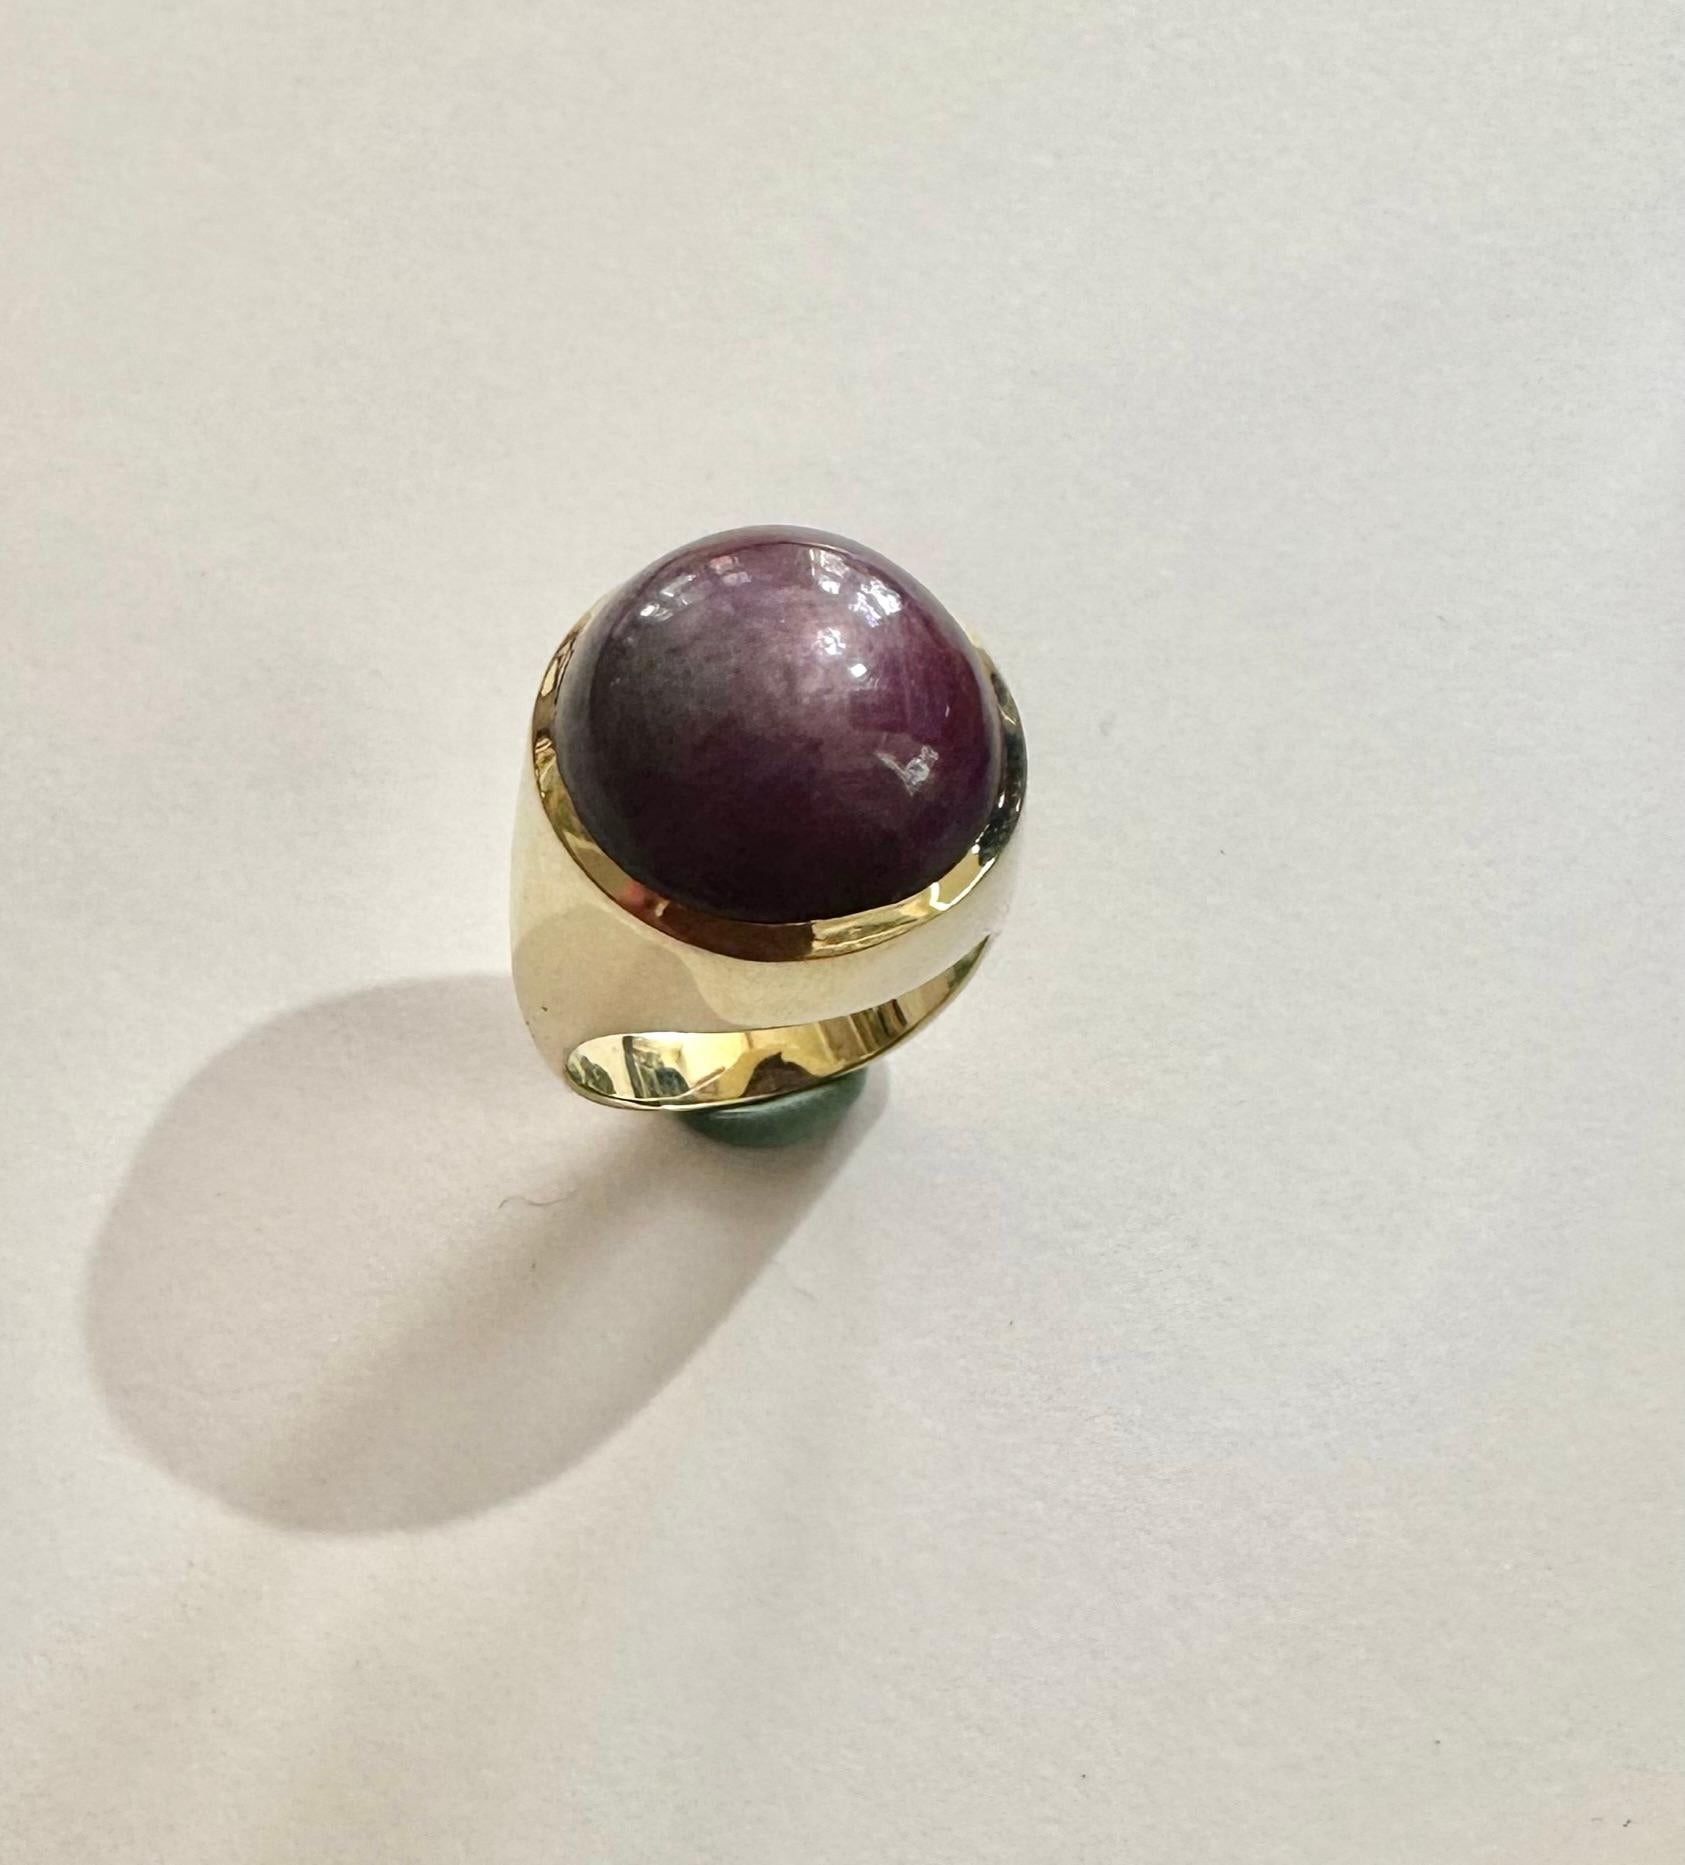 One (1) 12Karat Yellow Gold Ring.
Set with one Natural Corundum, STAR RUBY
Cabuchon (near round)
Measurments: 16.33 -16.79 x 13.84 mm   weight: ca. 40.88 Carart
Color: deep Purplish Red  Opaque , Asterism.
No indication of Heating
size of the ring: 